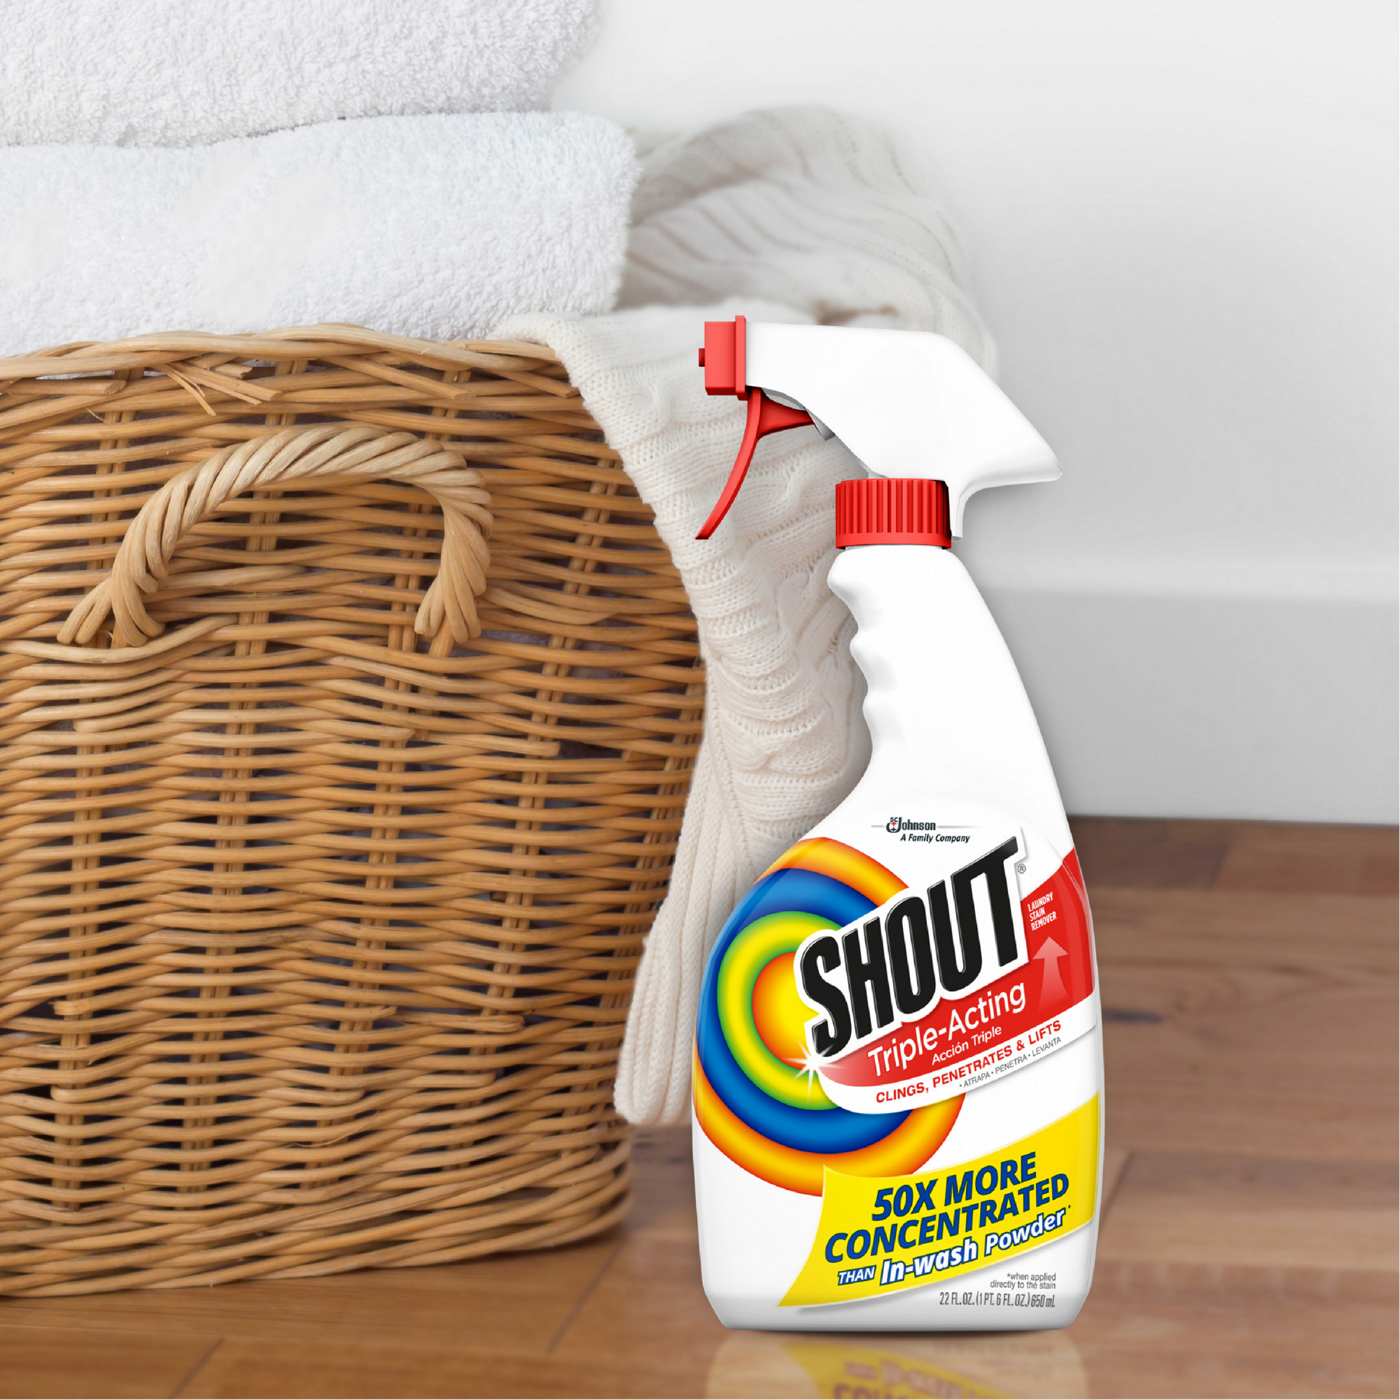 Shout Triple-Acting Laundry Stain Remover; image 2 of 3